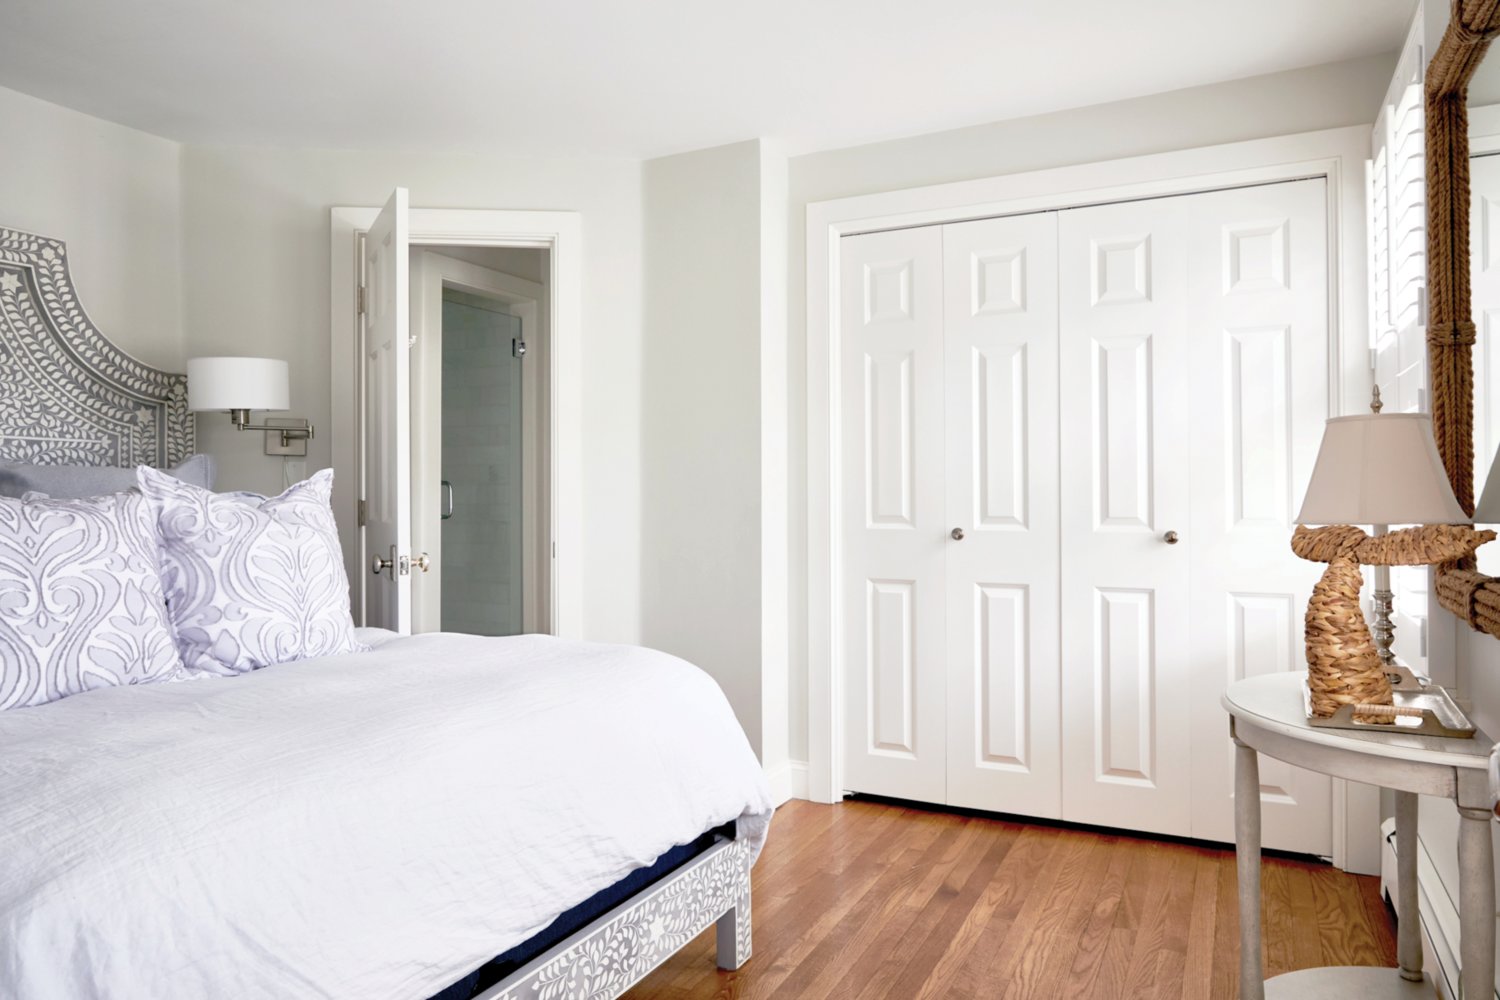 This bedroom has ample closet space and an en-suite bathroom.